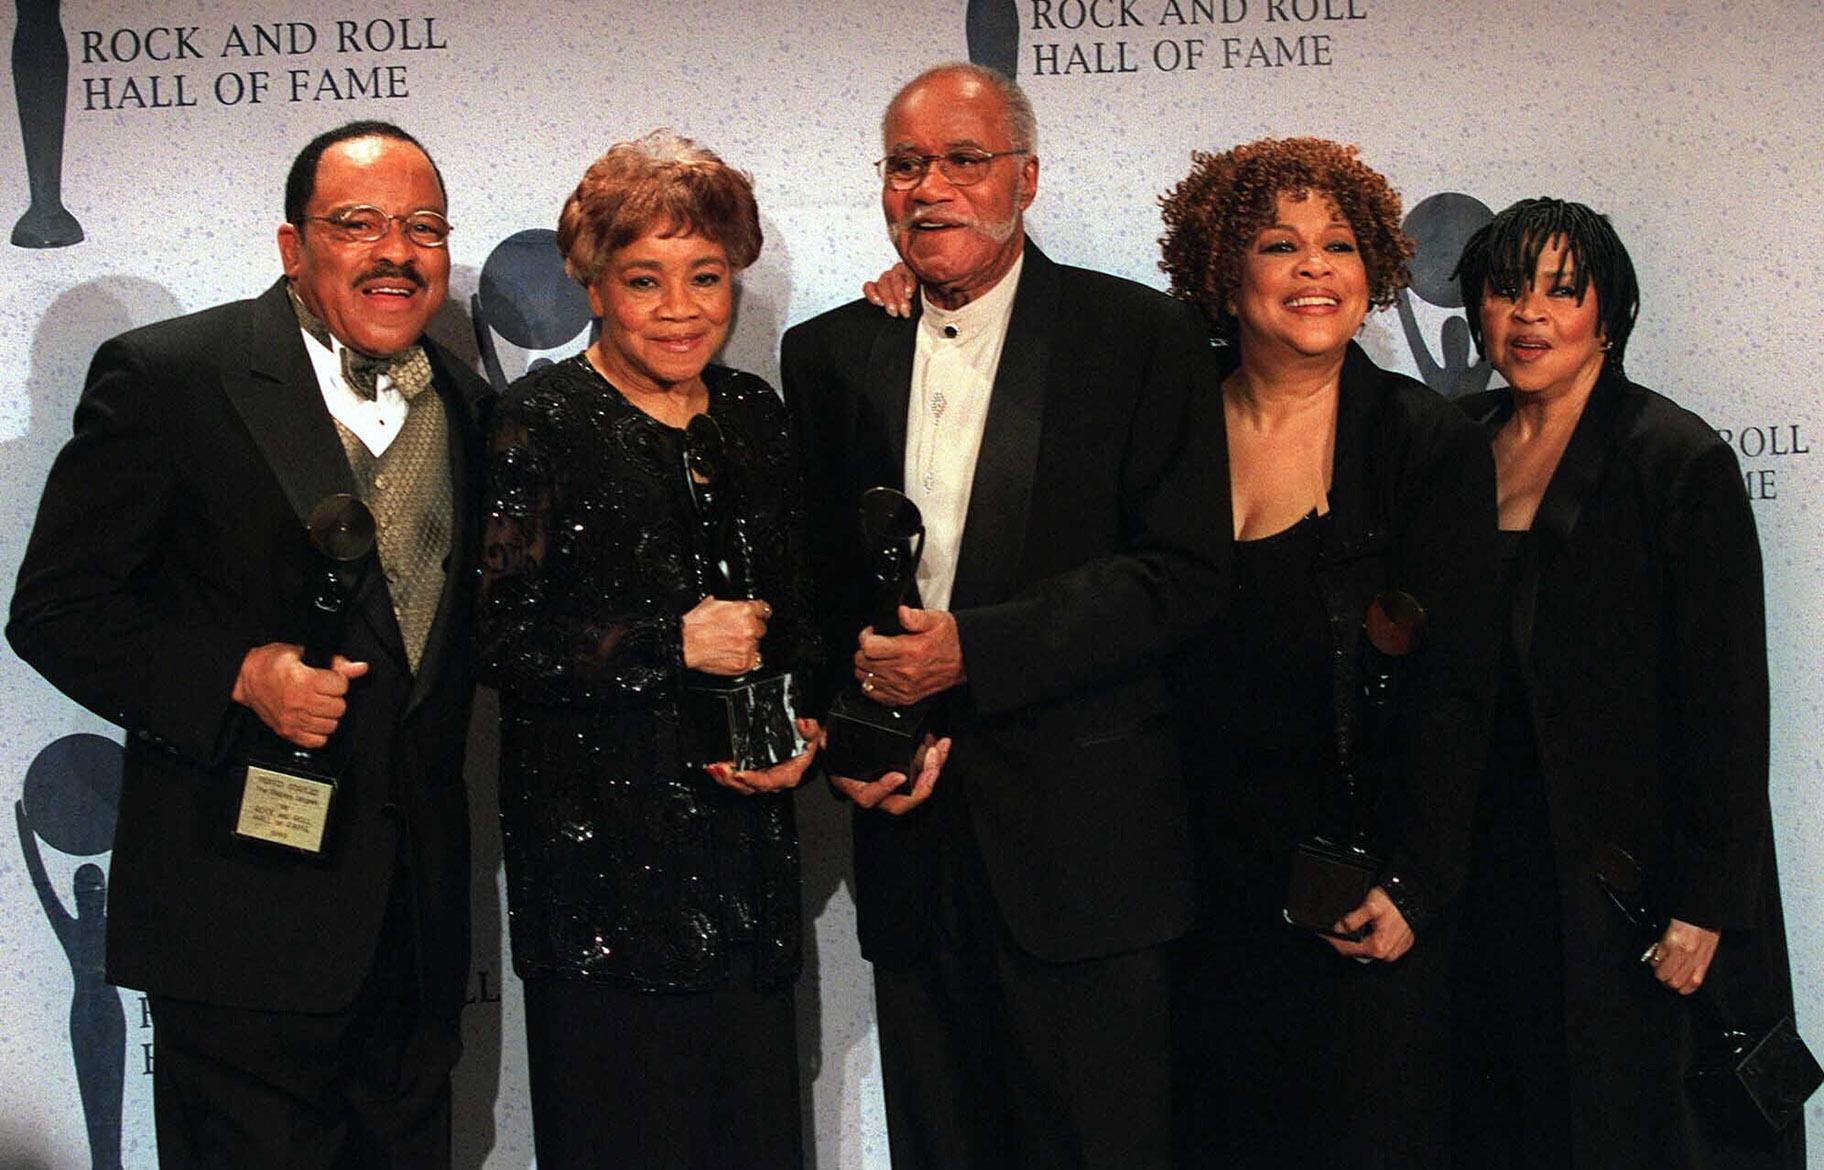 In this March 15, 1999 file photo, The Staple Singers, from left, Pervis, Cleotha, Pops, Mavis, and Yvonne pose at the Rock and Roll Hall of Fame induction ceremony in New York. (AP Photo / Albert Ferreira, File)